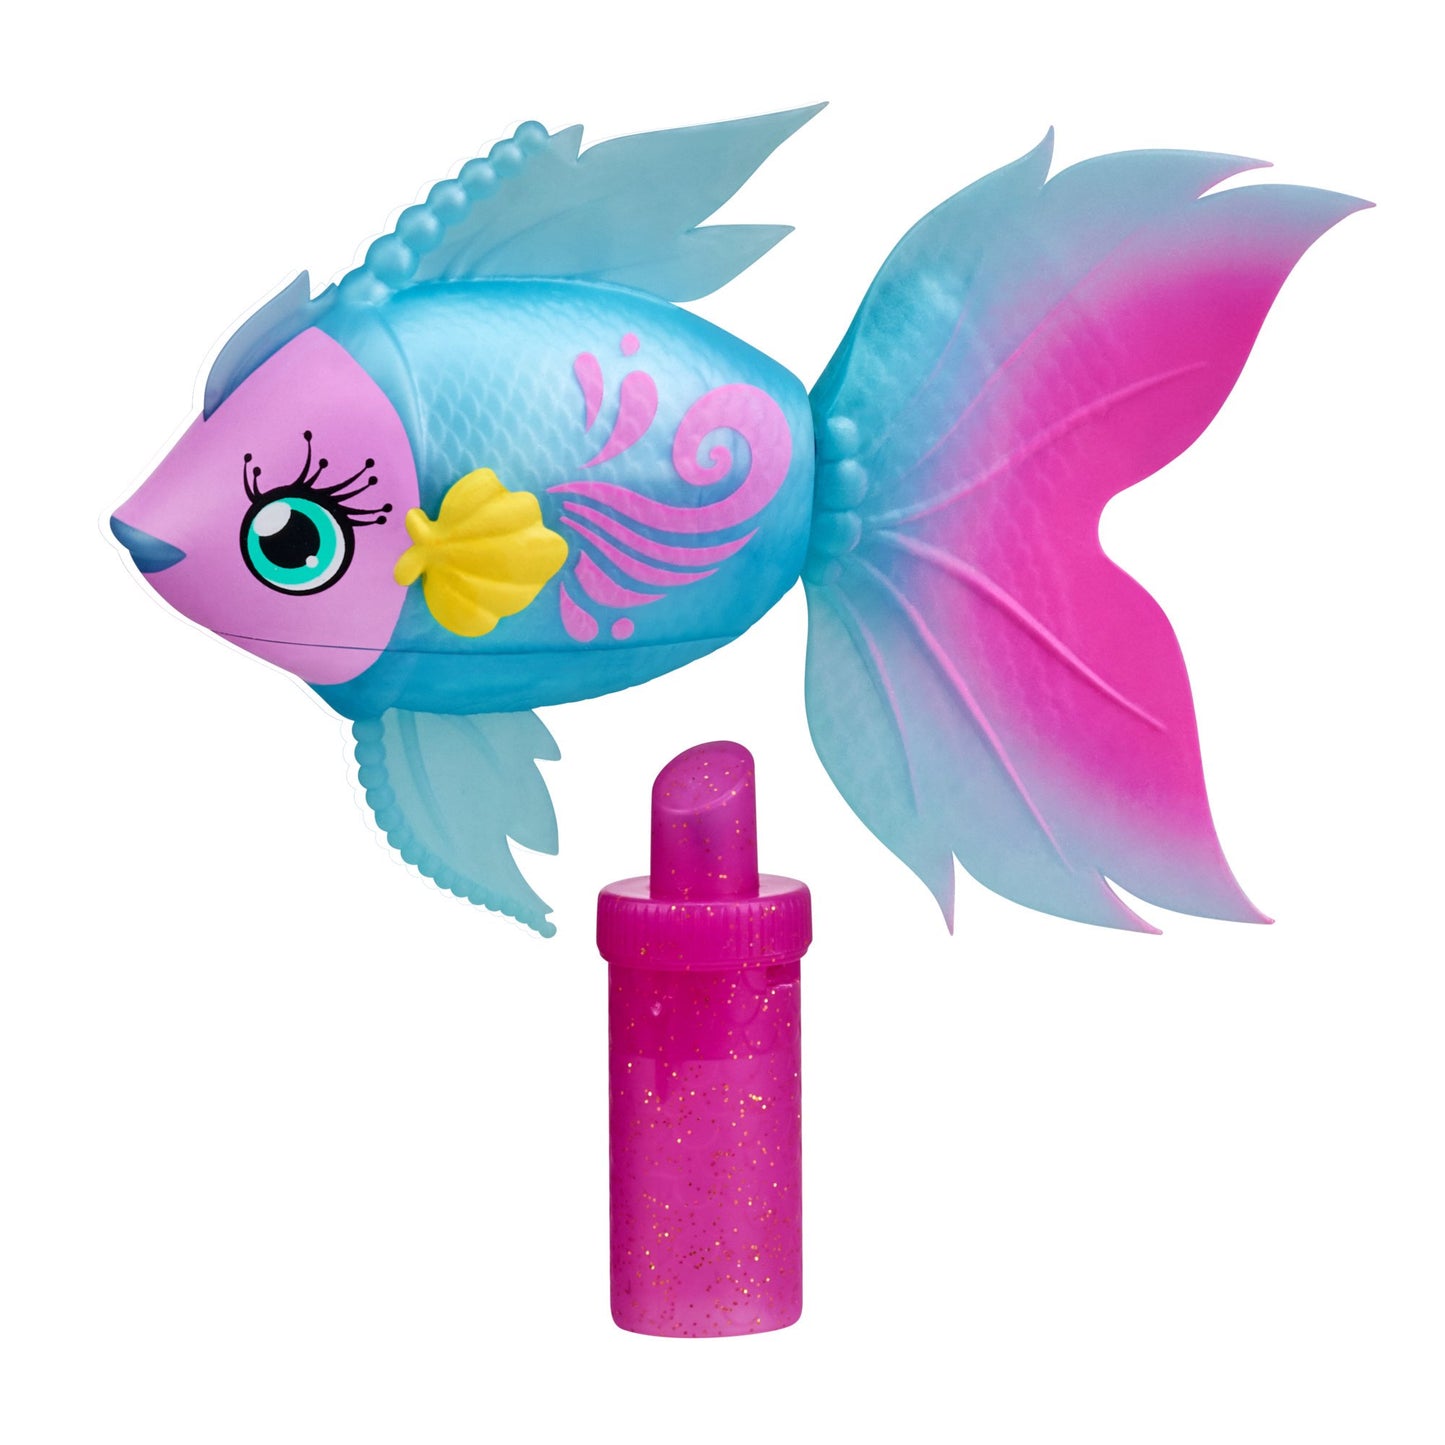 Little Live Pets Lil' Dippers Fish - Magical Water Activated Unboxing and Interactive Feeding Experience - Seaqueen, Bellariva, Furtail